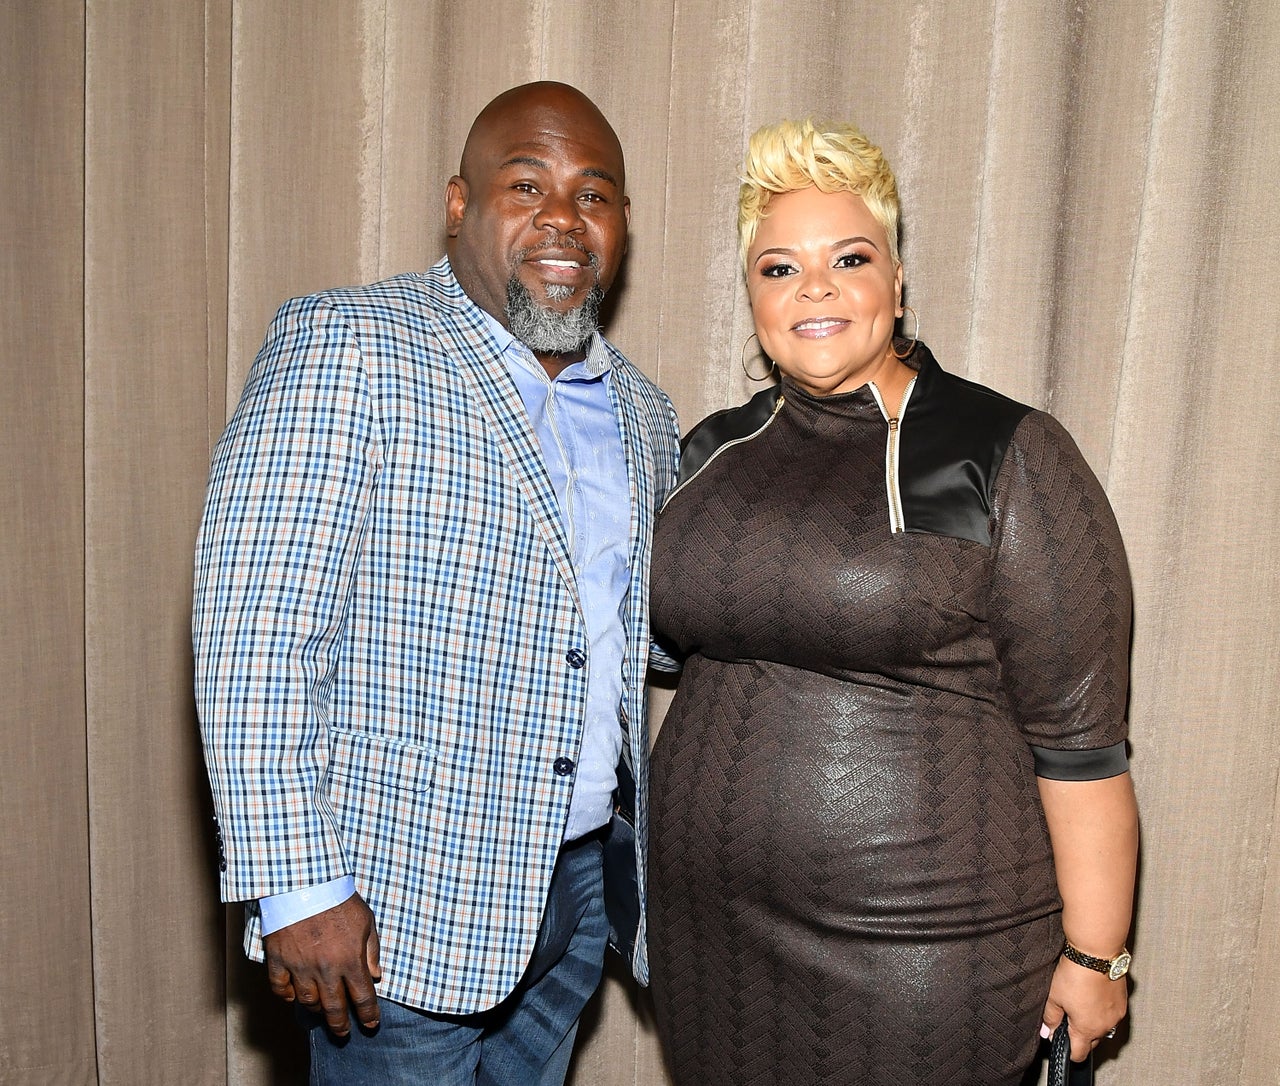 Happy Anniversary! David And Tamela Mann Celebrate 29 Years Of Marriage